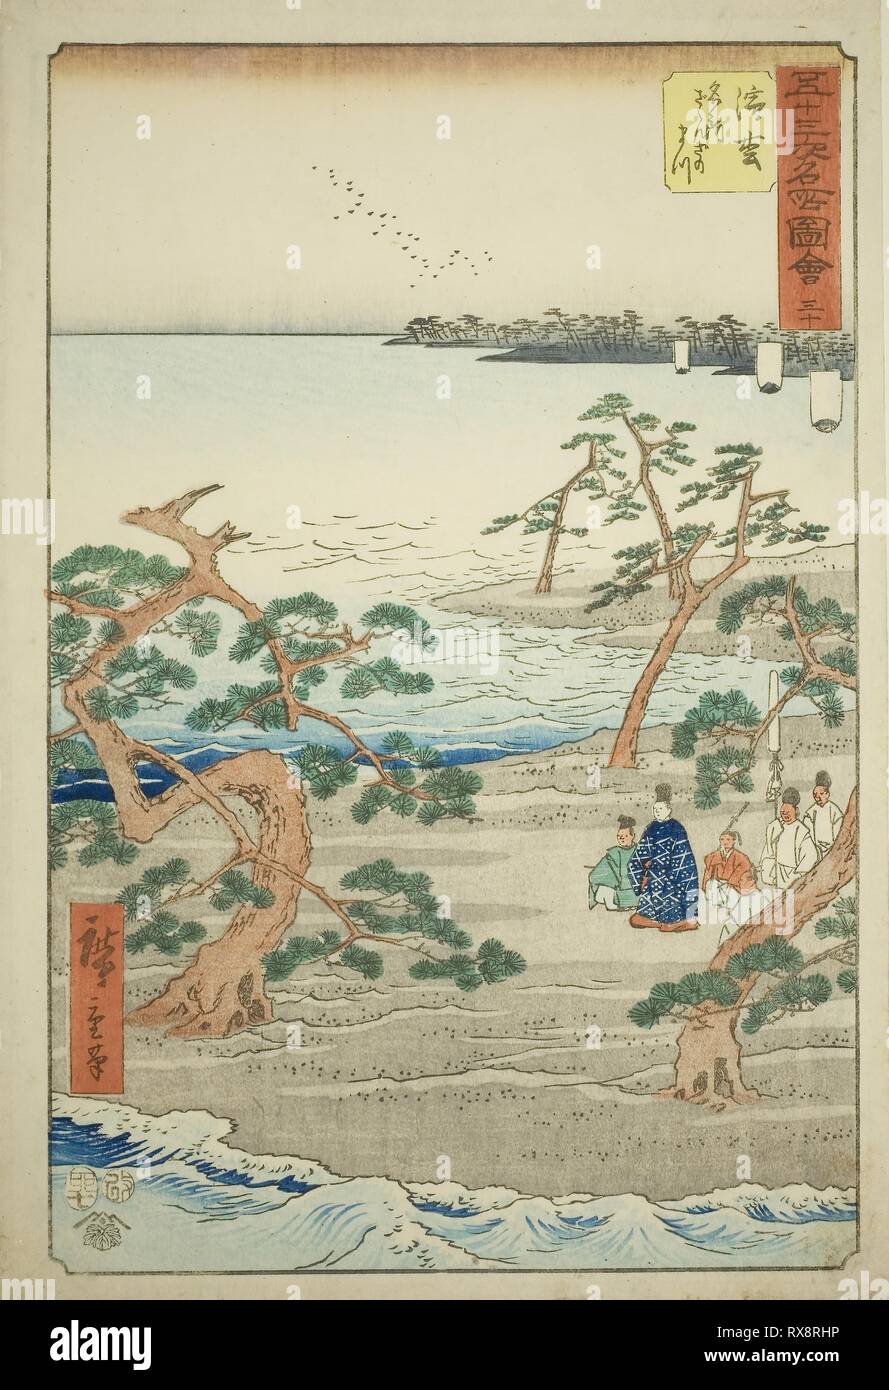 Hamamatsu: The Famous Murmuring Pines (Hamamatsu, meisho zazanza no matsu), no. 30 from the series 'Famous Sights of the Fifty-three Stations (Gojusan tsugi meisho zue),' also known as the Vertical Tokaido. Utagawa Hiroshige ?? ??; Japanese, 1797-1858. Date: 1855. Dimensions: 36.5 x 25.1 cm (14 3/8 x 9 7/8 in.). Color woodblock print; oban. Origin: Japan. Museum: The Chicago Art Institute. Stock Photo